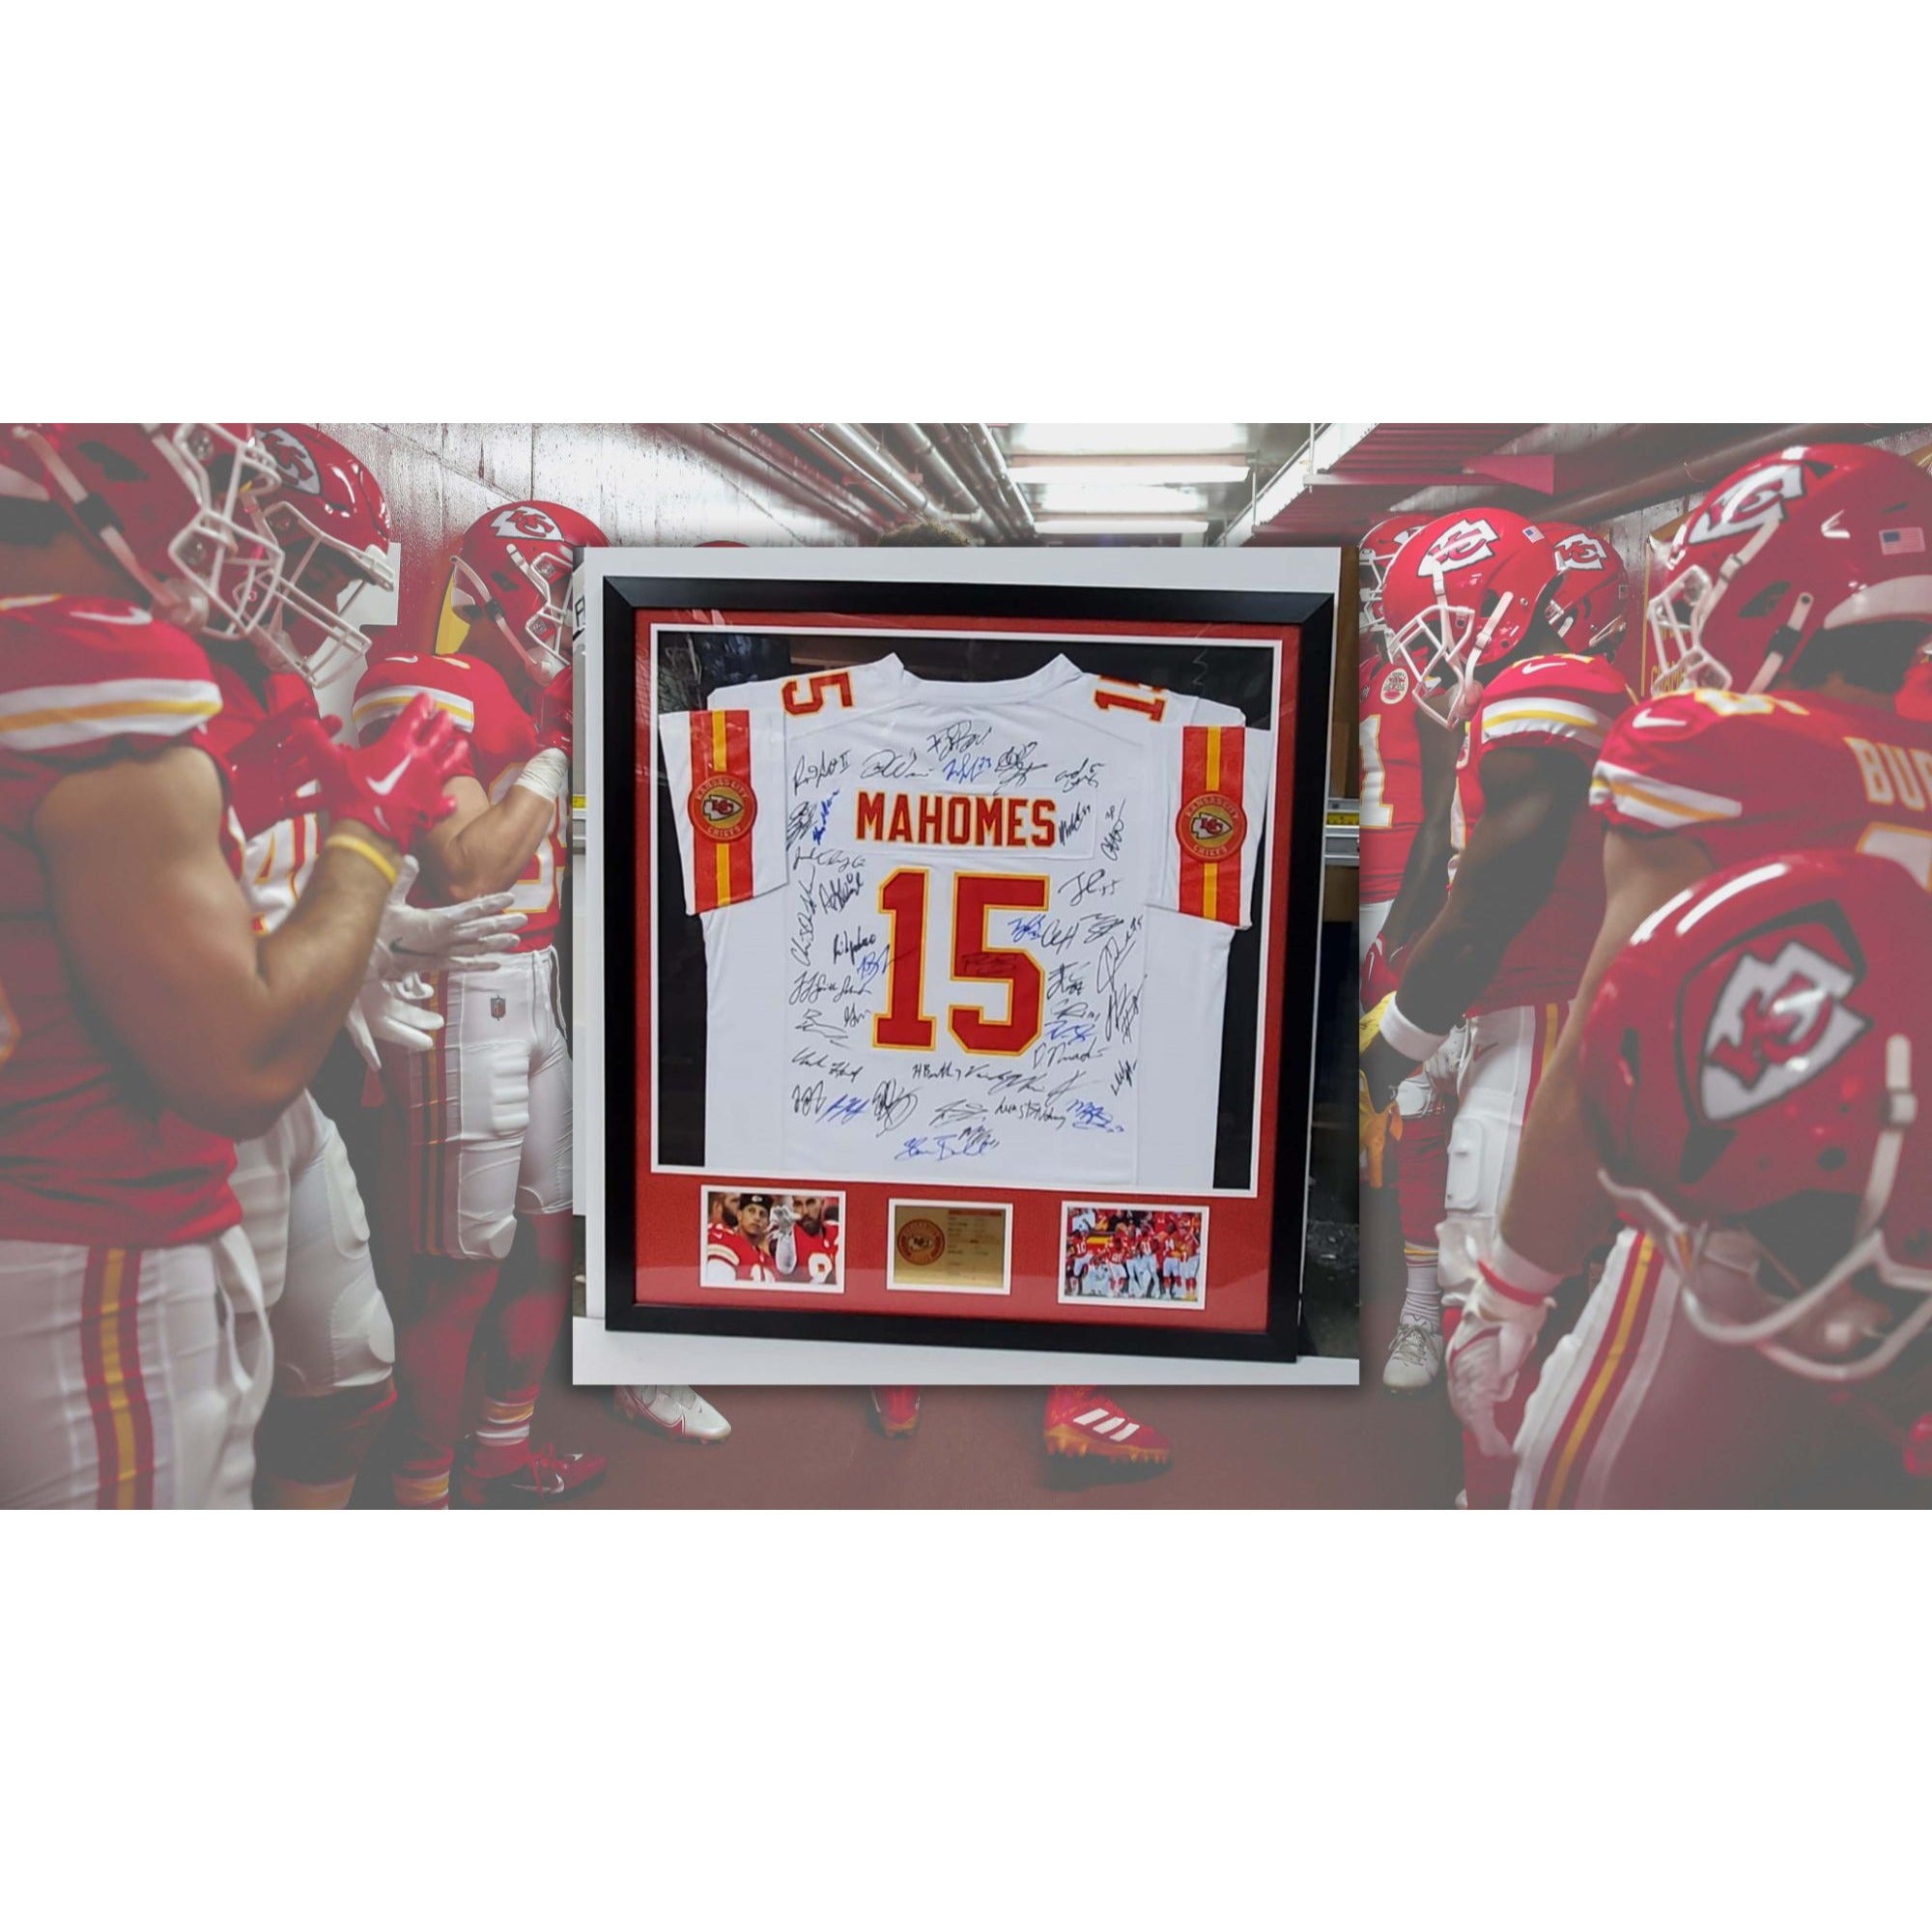 Patrick Mahomes Andy Reid Travis Kelce 2022 team signed and framed jersey signed with proof